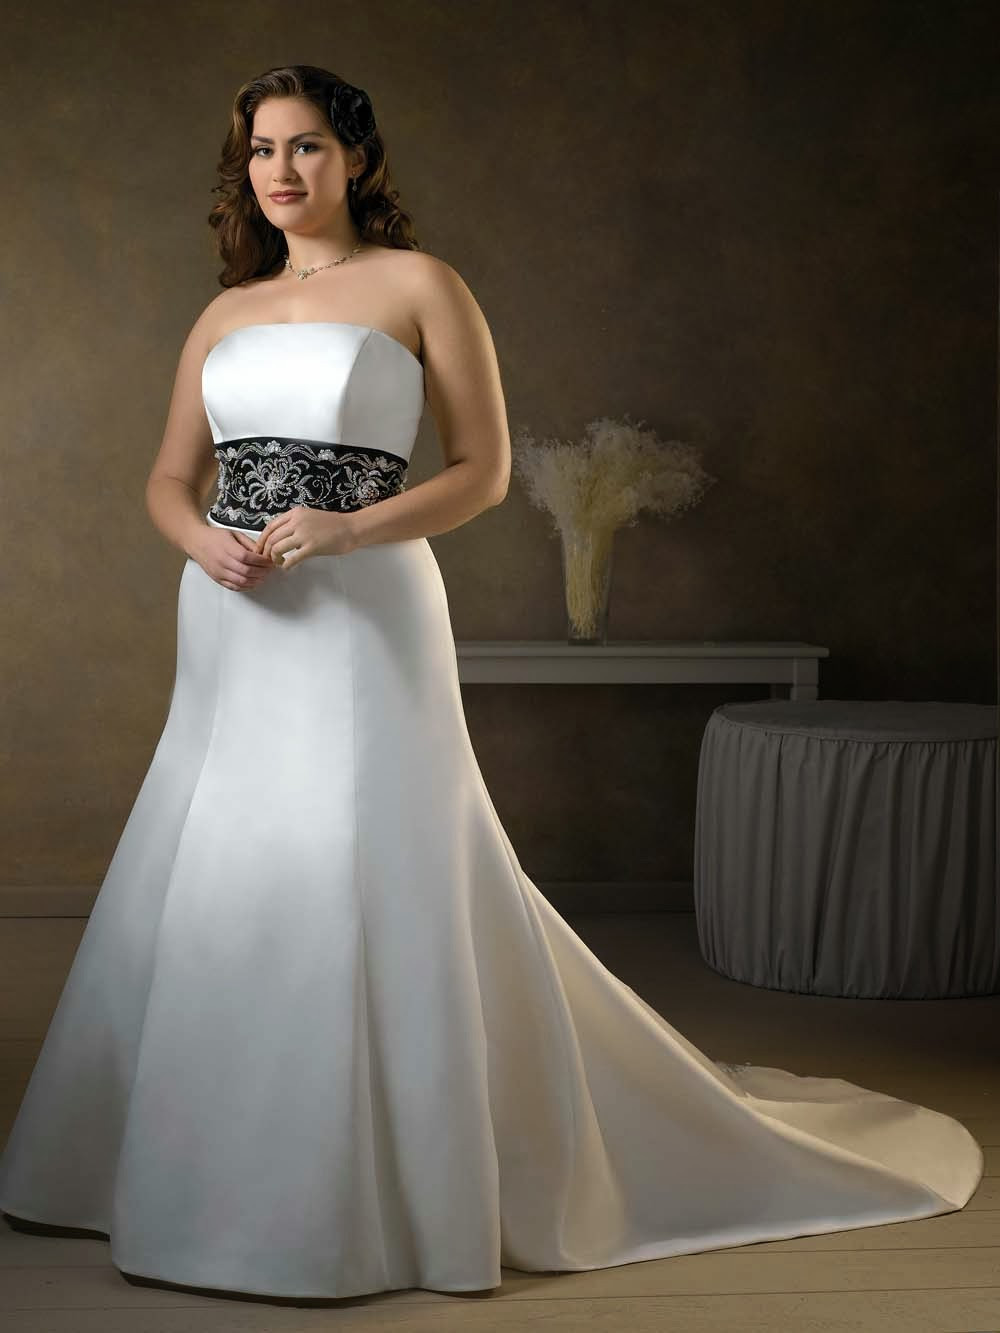 Used Plus Size Wedding Dresses
 USED WEDDING GOWN GET HIGH QUALITY PLUS SIZE DRESS WITH